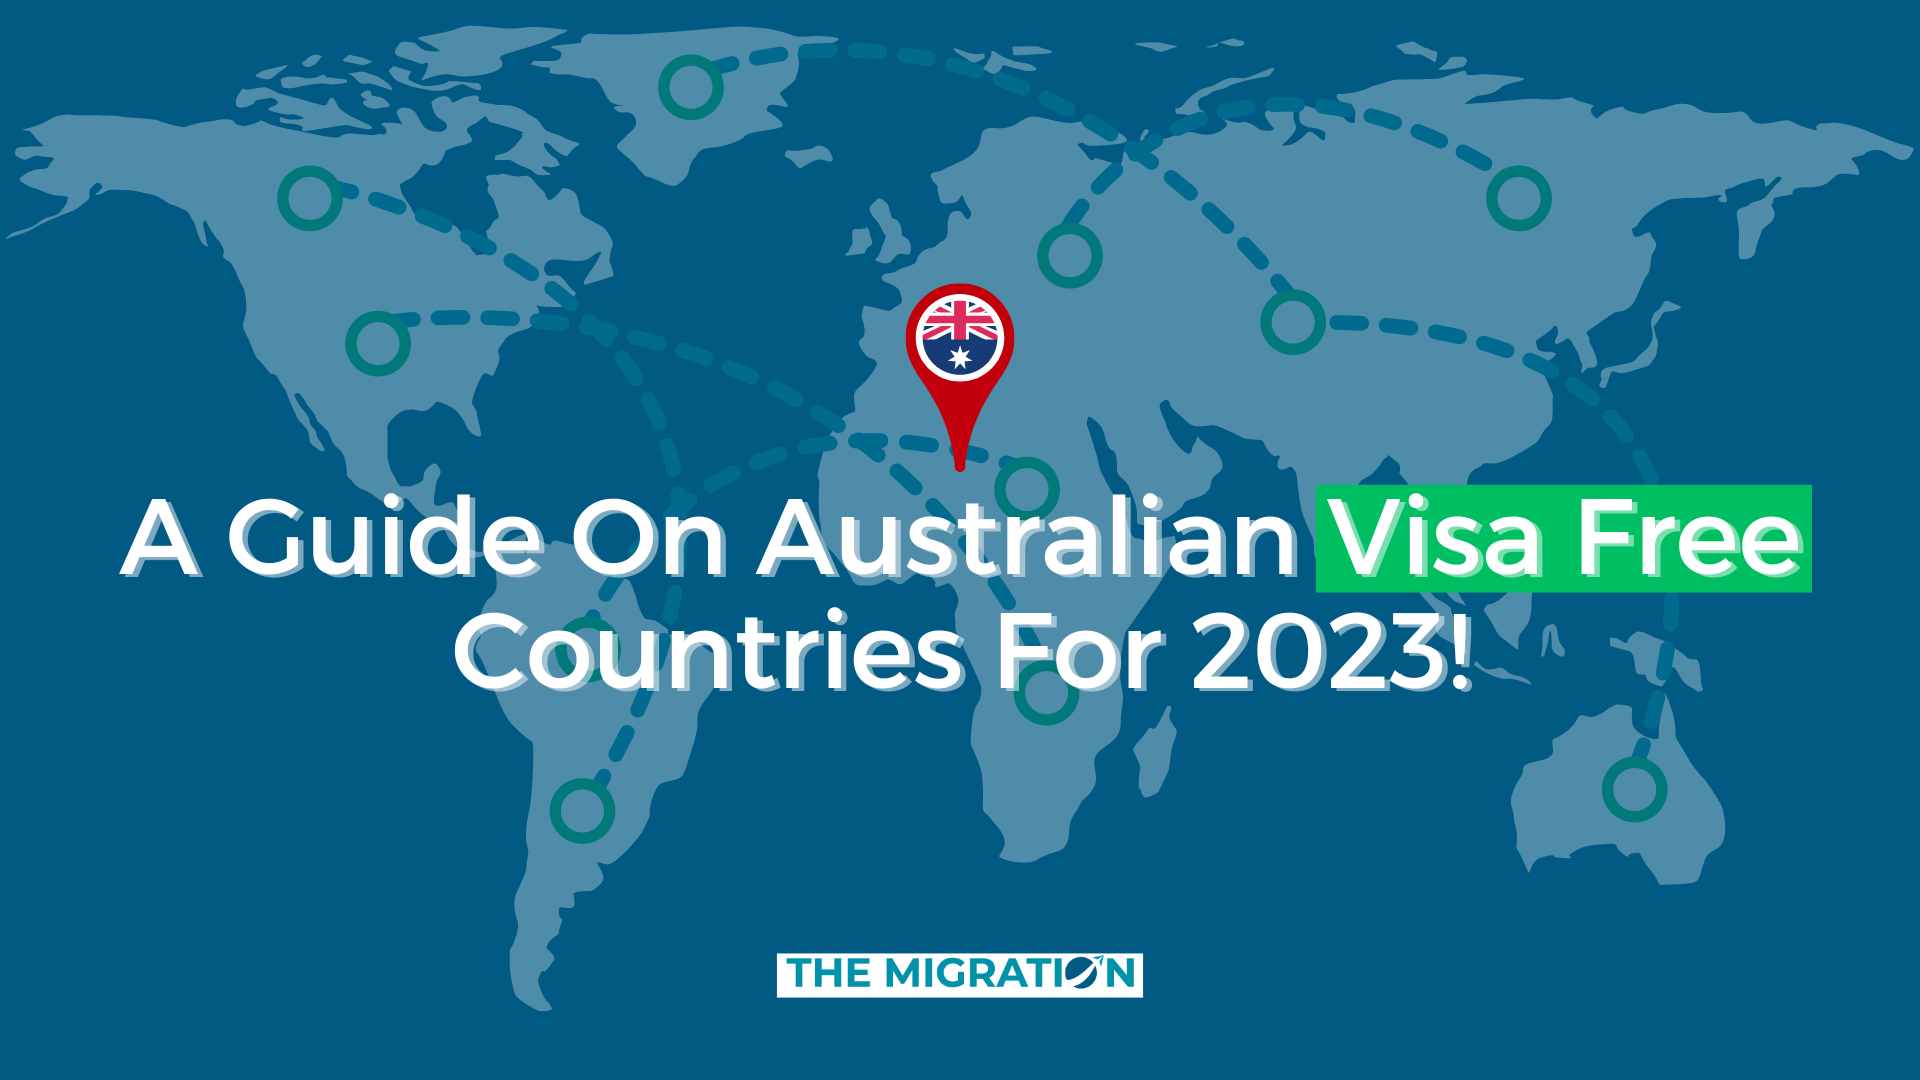 A guide on Australian visa free countries for 2023